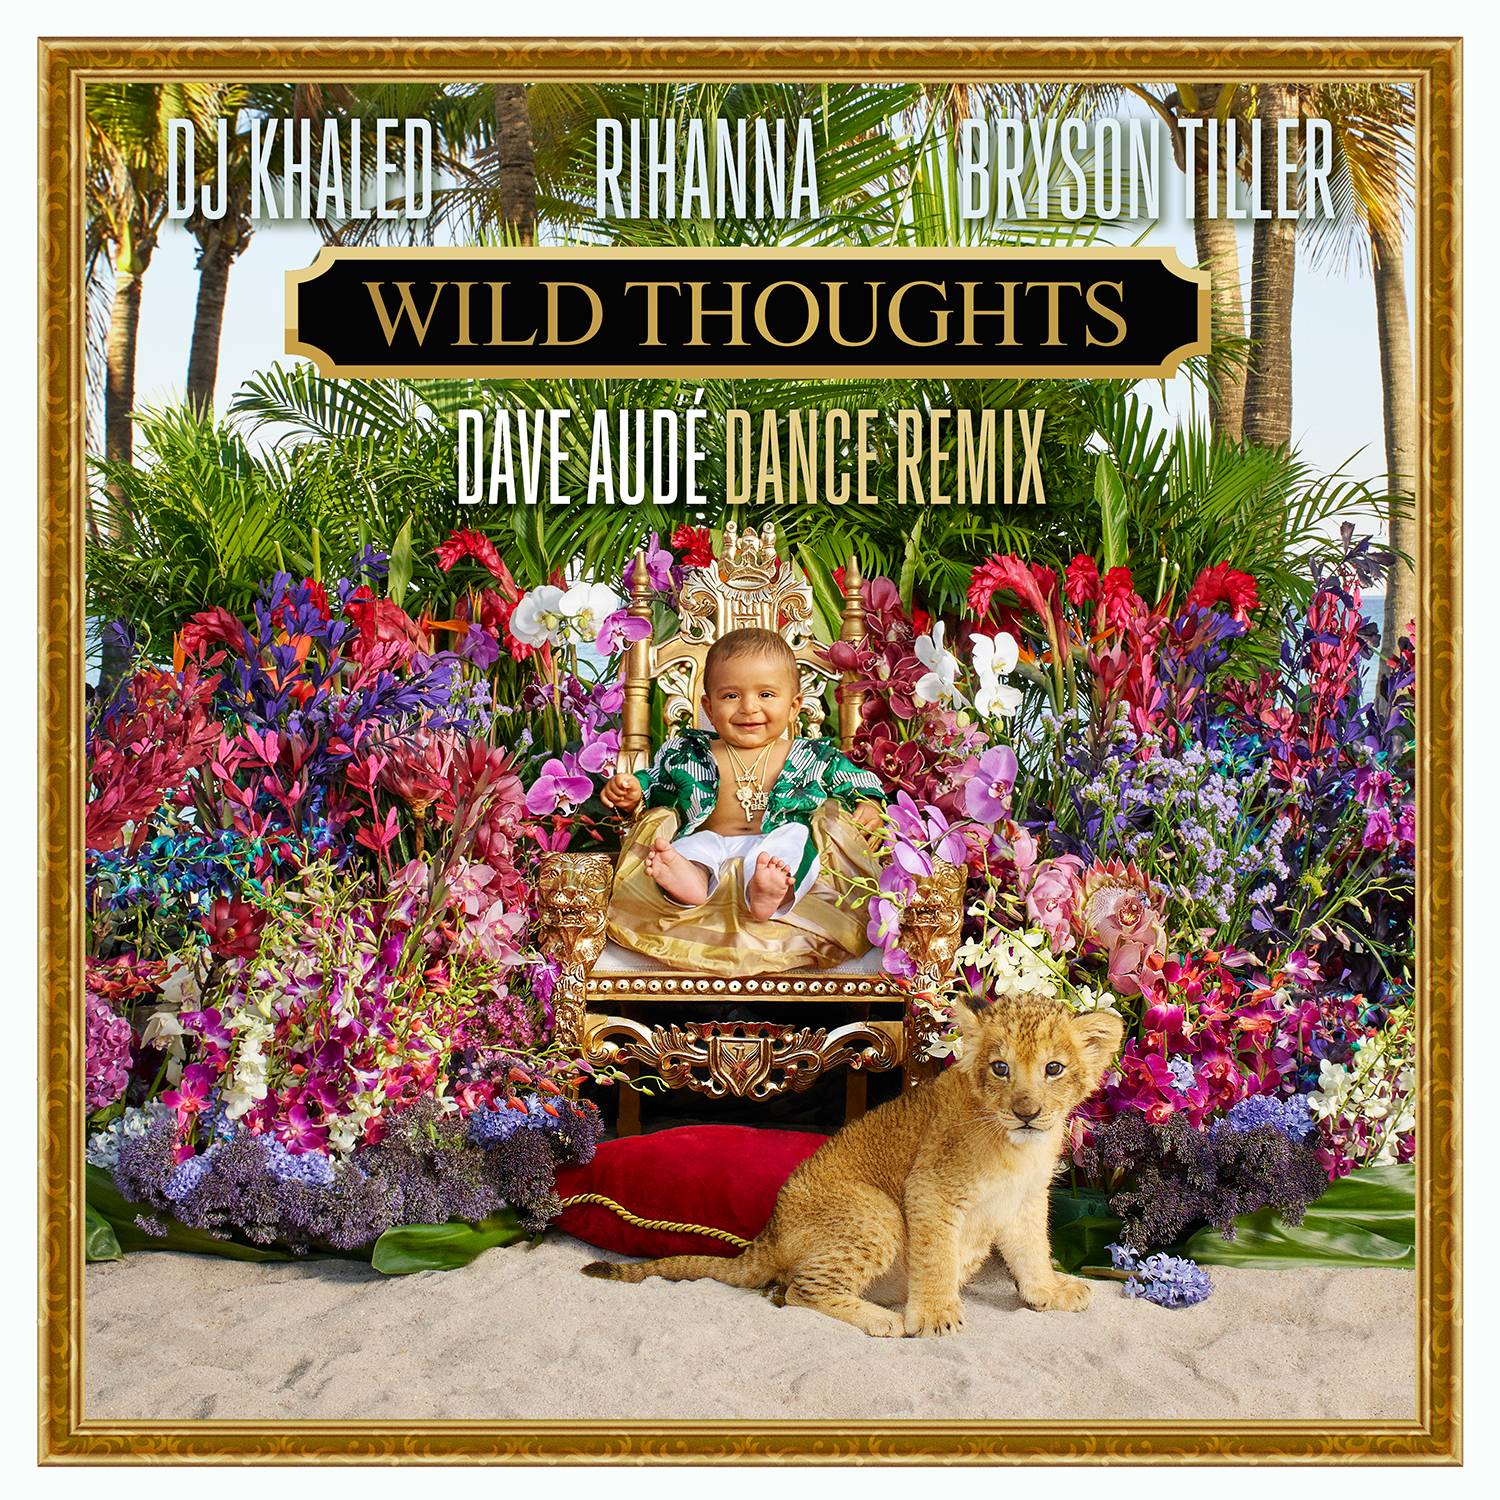 Wild Thoughts Dave Aude Dance Remix